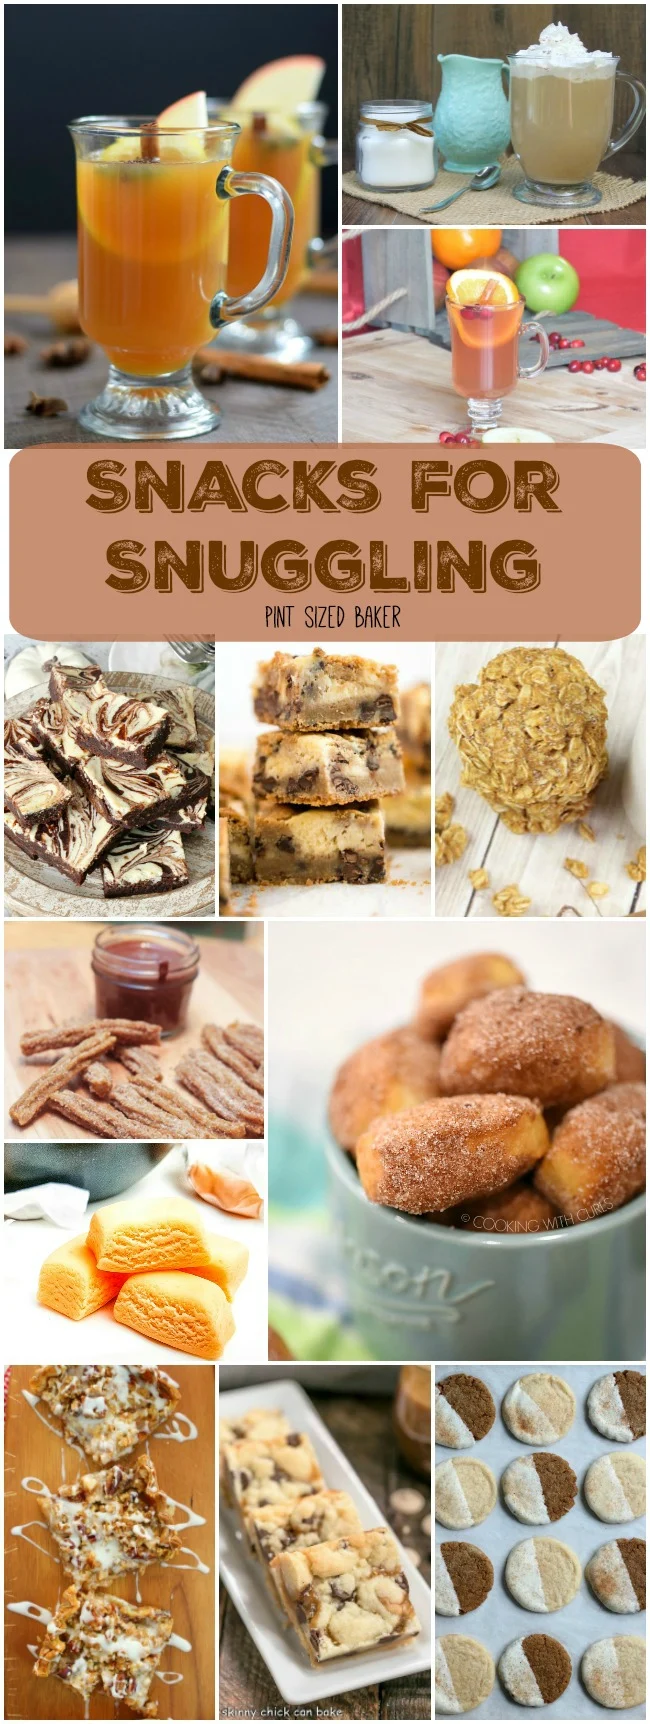 12 perfect snacks for snuggling with the family on the couch to watch TV. Get comfy while the parents enjoy an after dinner drink and the kids nosh on some yummy dessert.